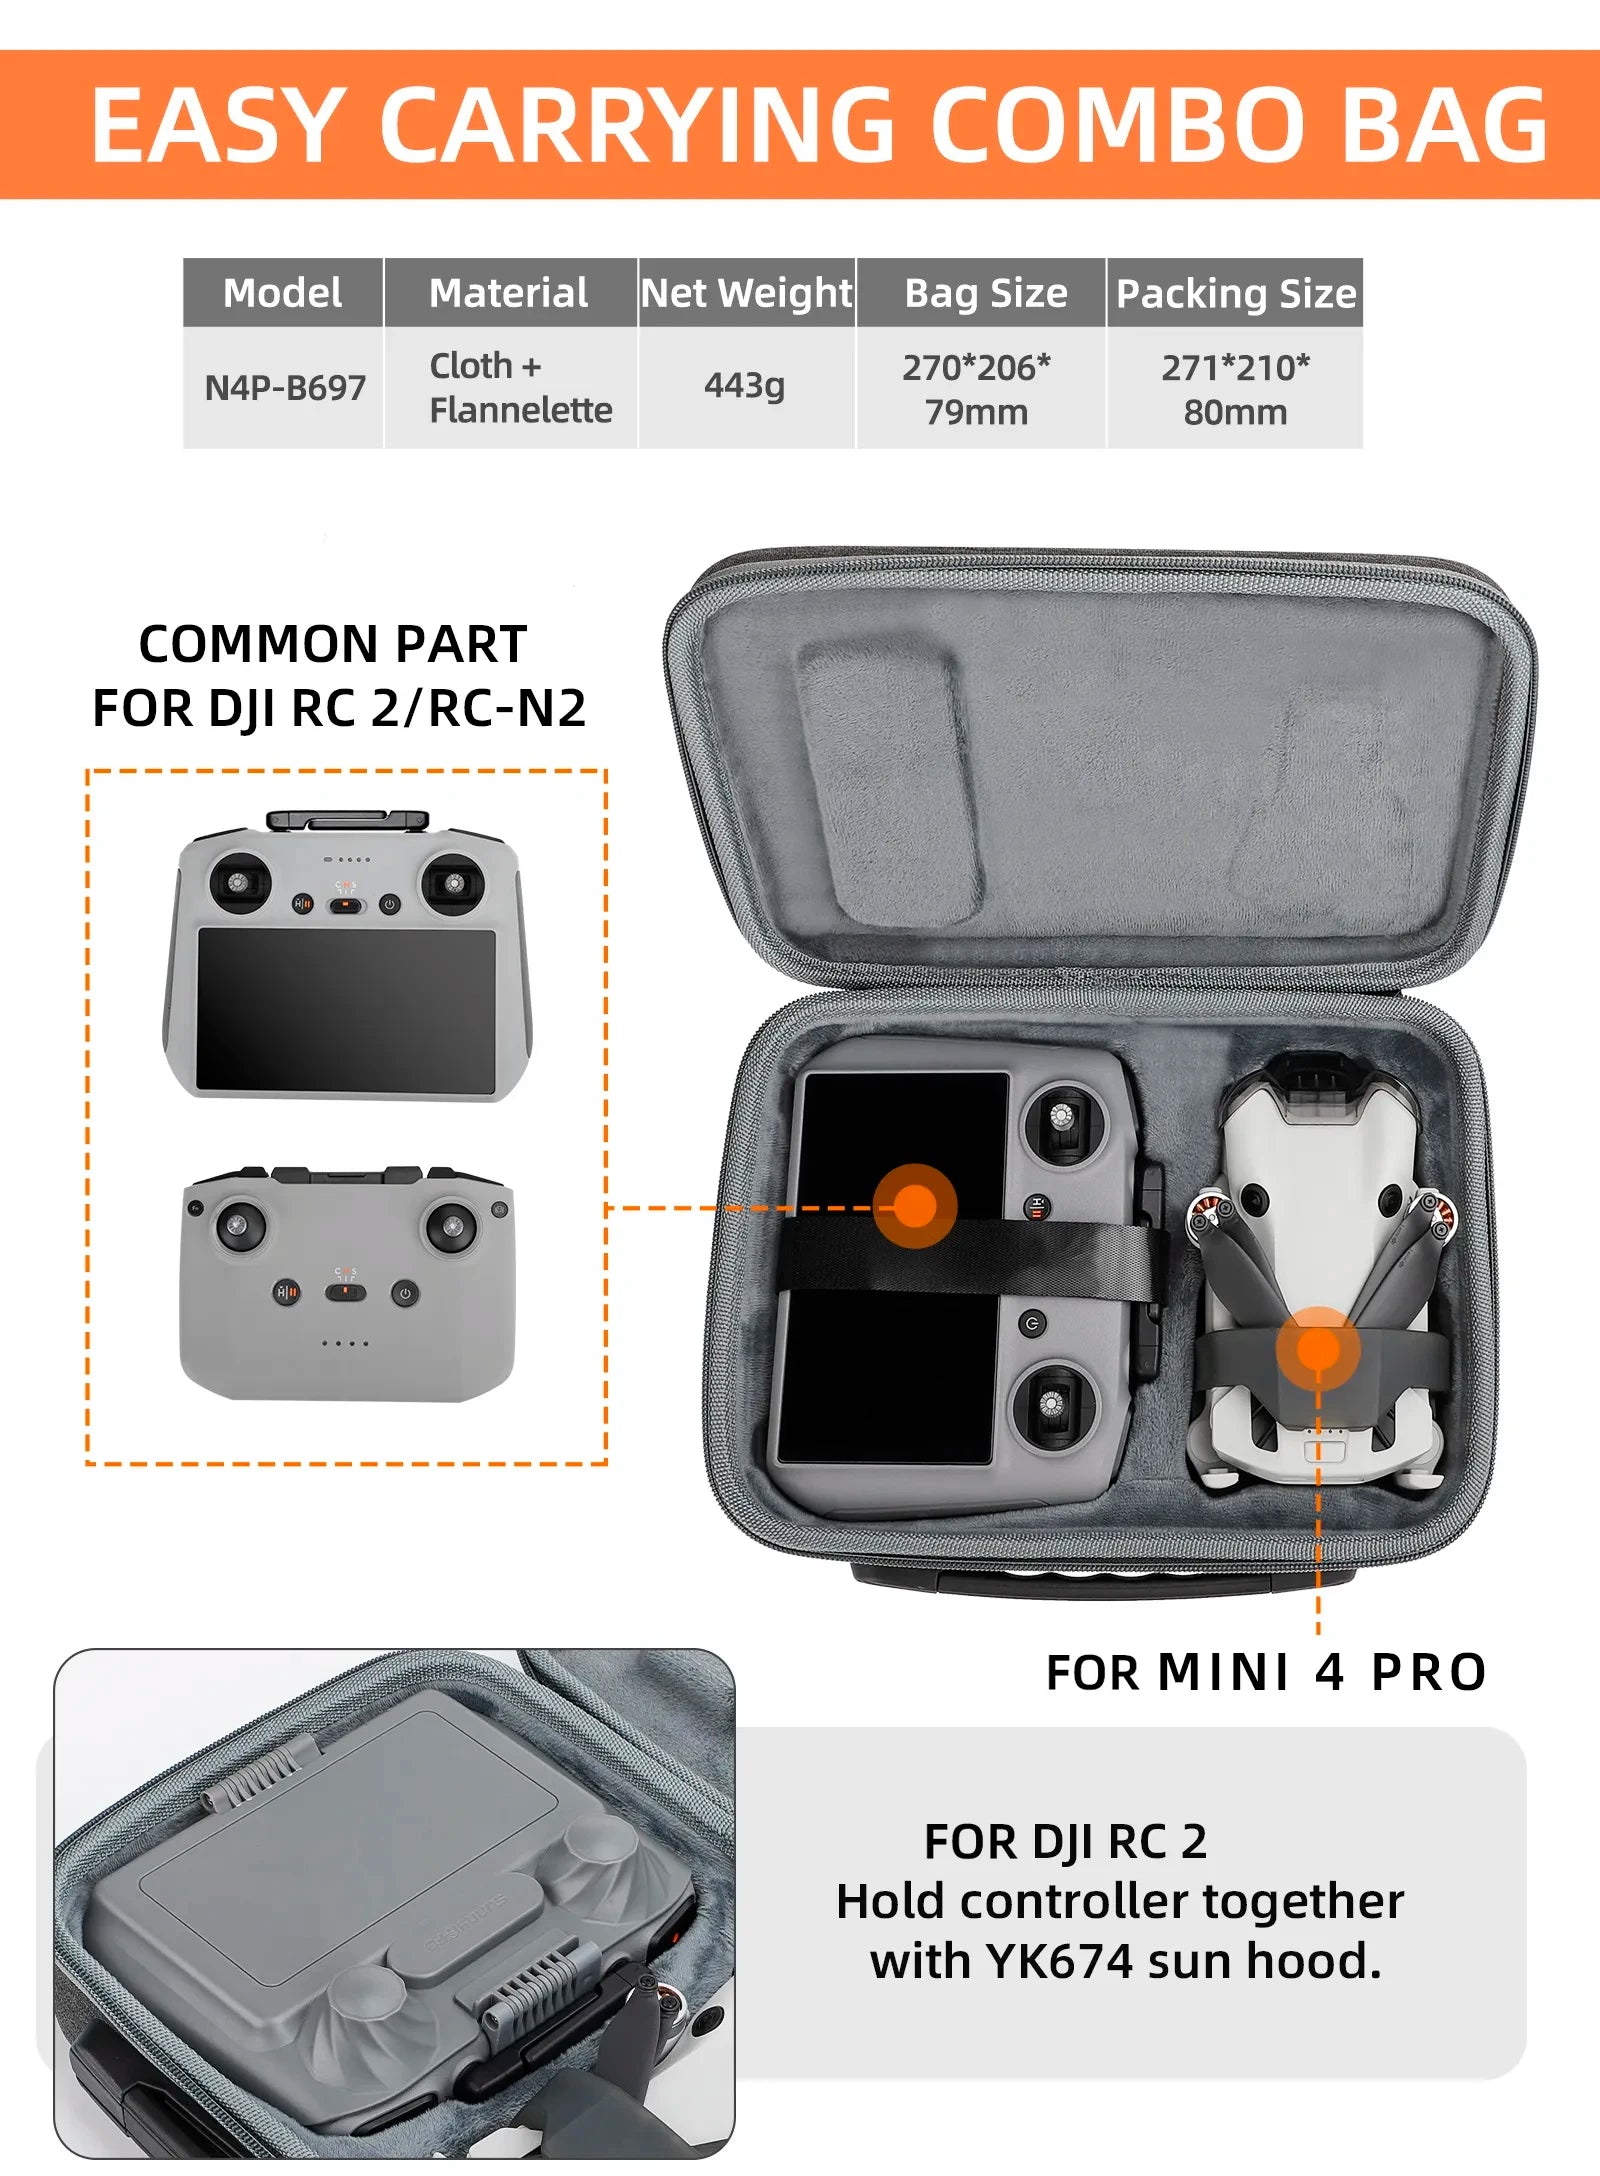 Portable Carrying Case For DJI Mini 4 Pro, EASY CARRYING COMBO BAG Model Material Net Weightl Bag Size